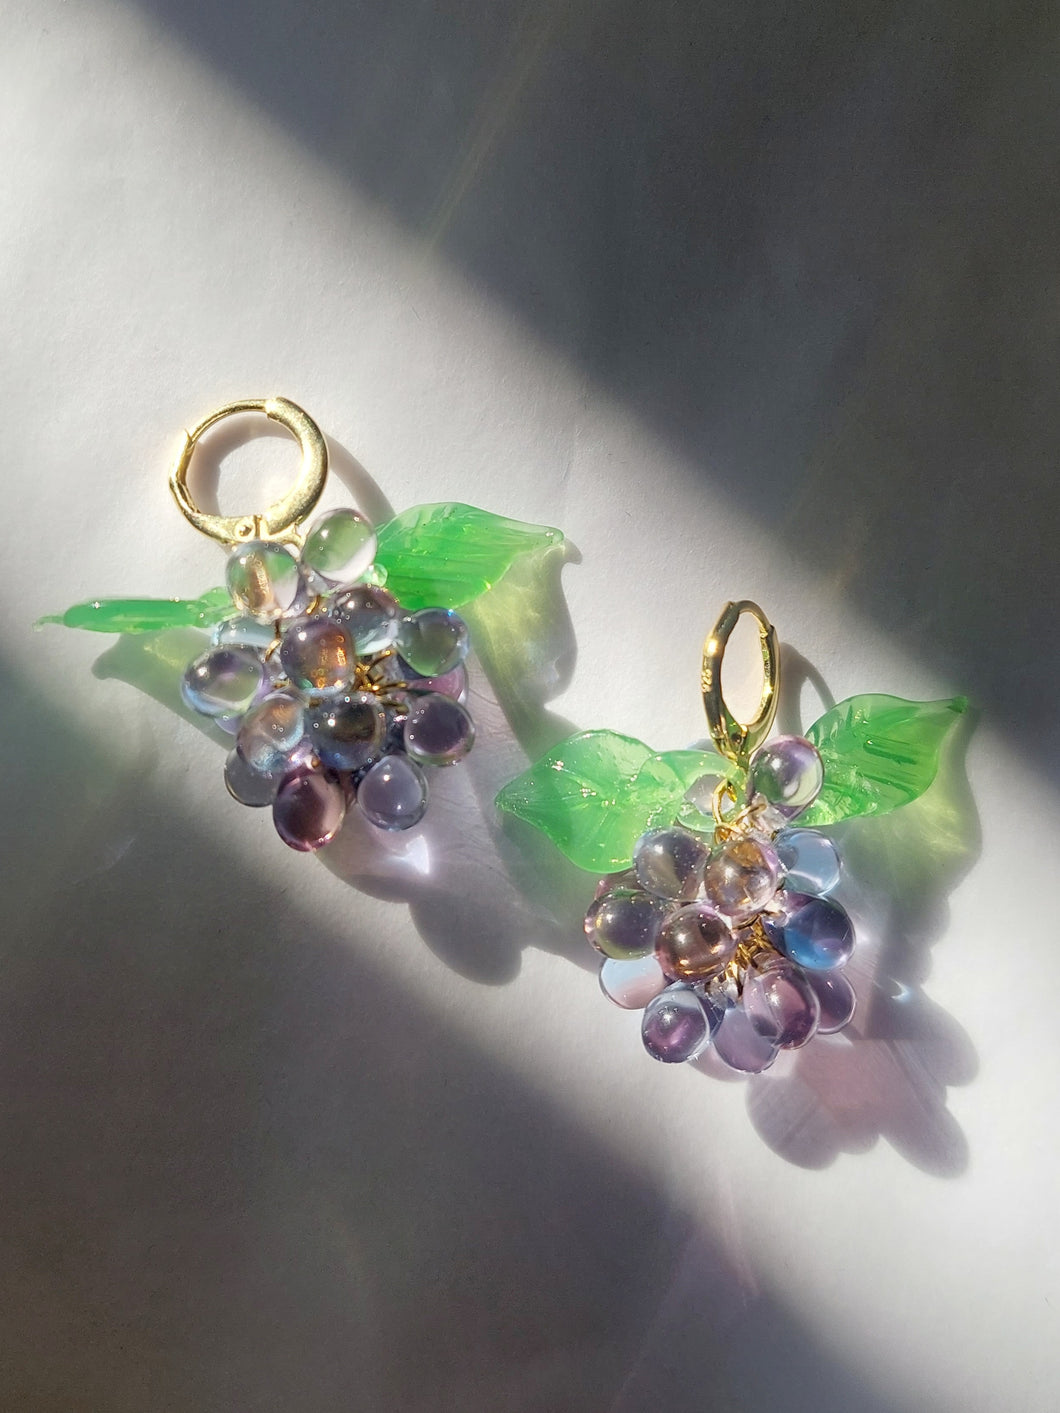 Cute handmade sterling silver huggie hoop earrings with Berries charm made of Czech and Murano glass beads. The perfect colorful jewelry for you or a gift.